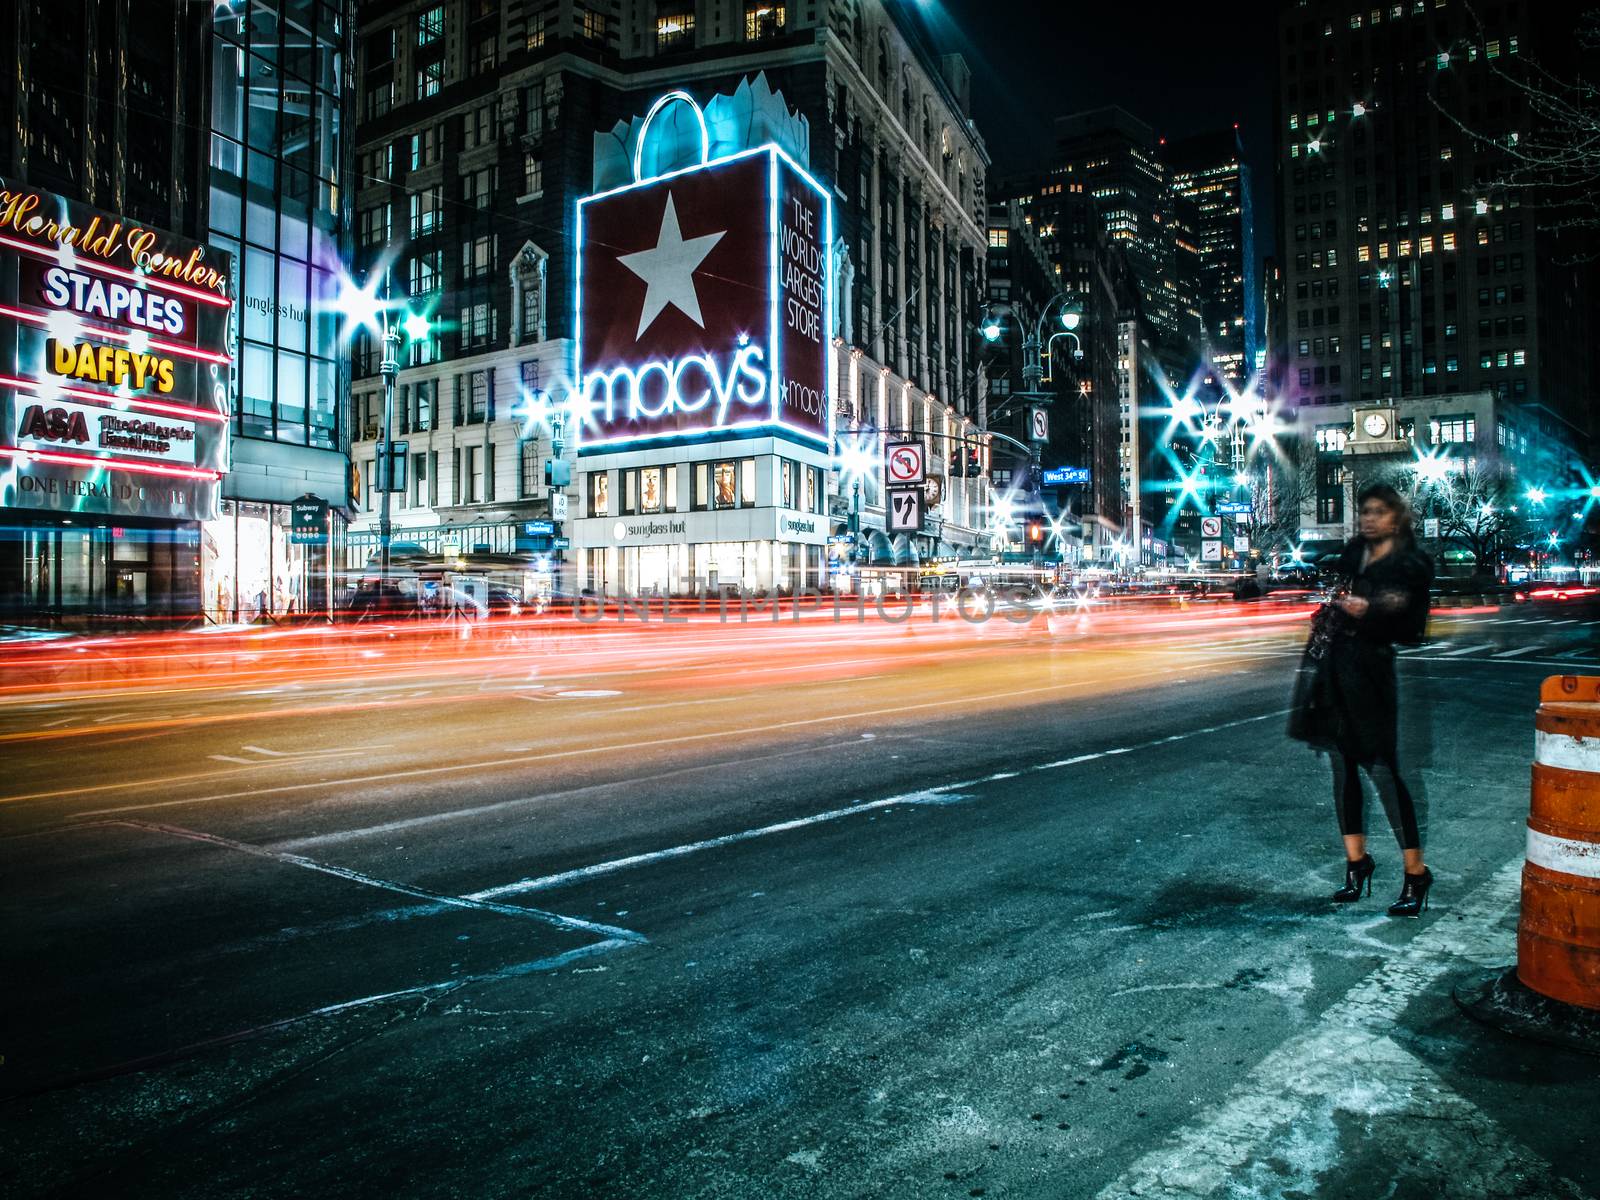 Hailing a Cab in New York City by samULvisuals